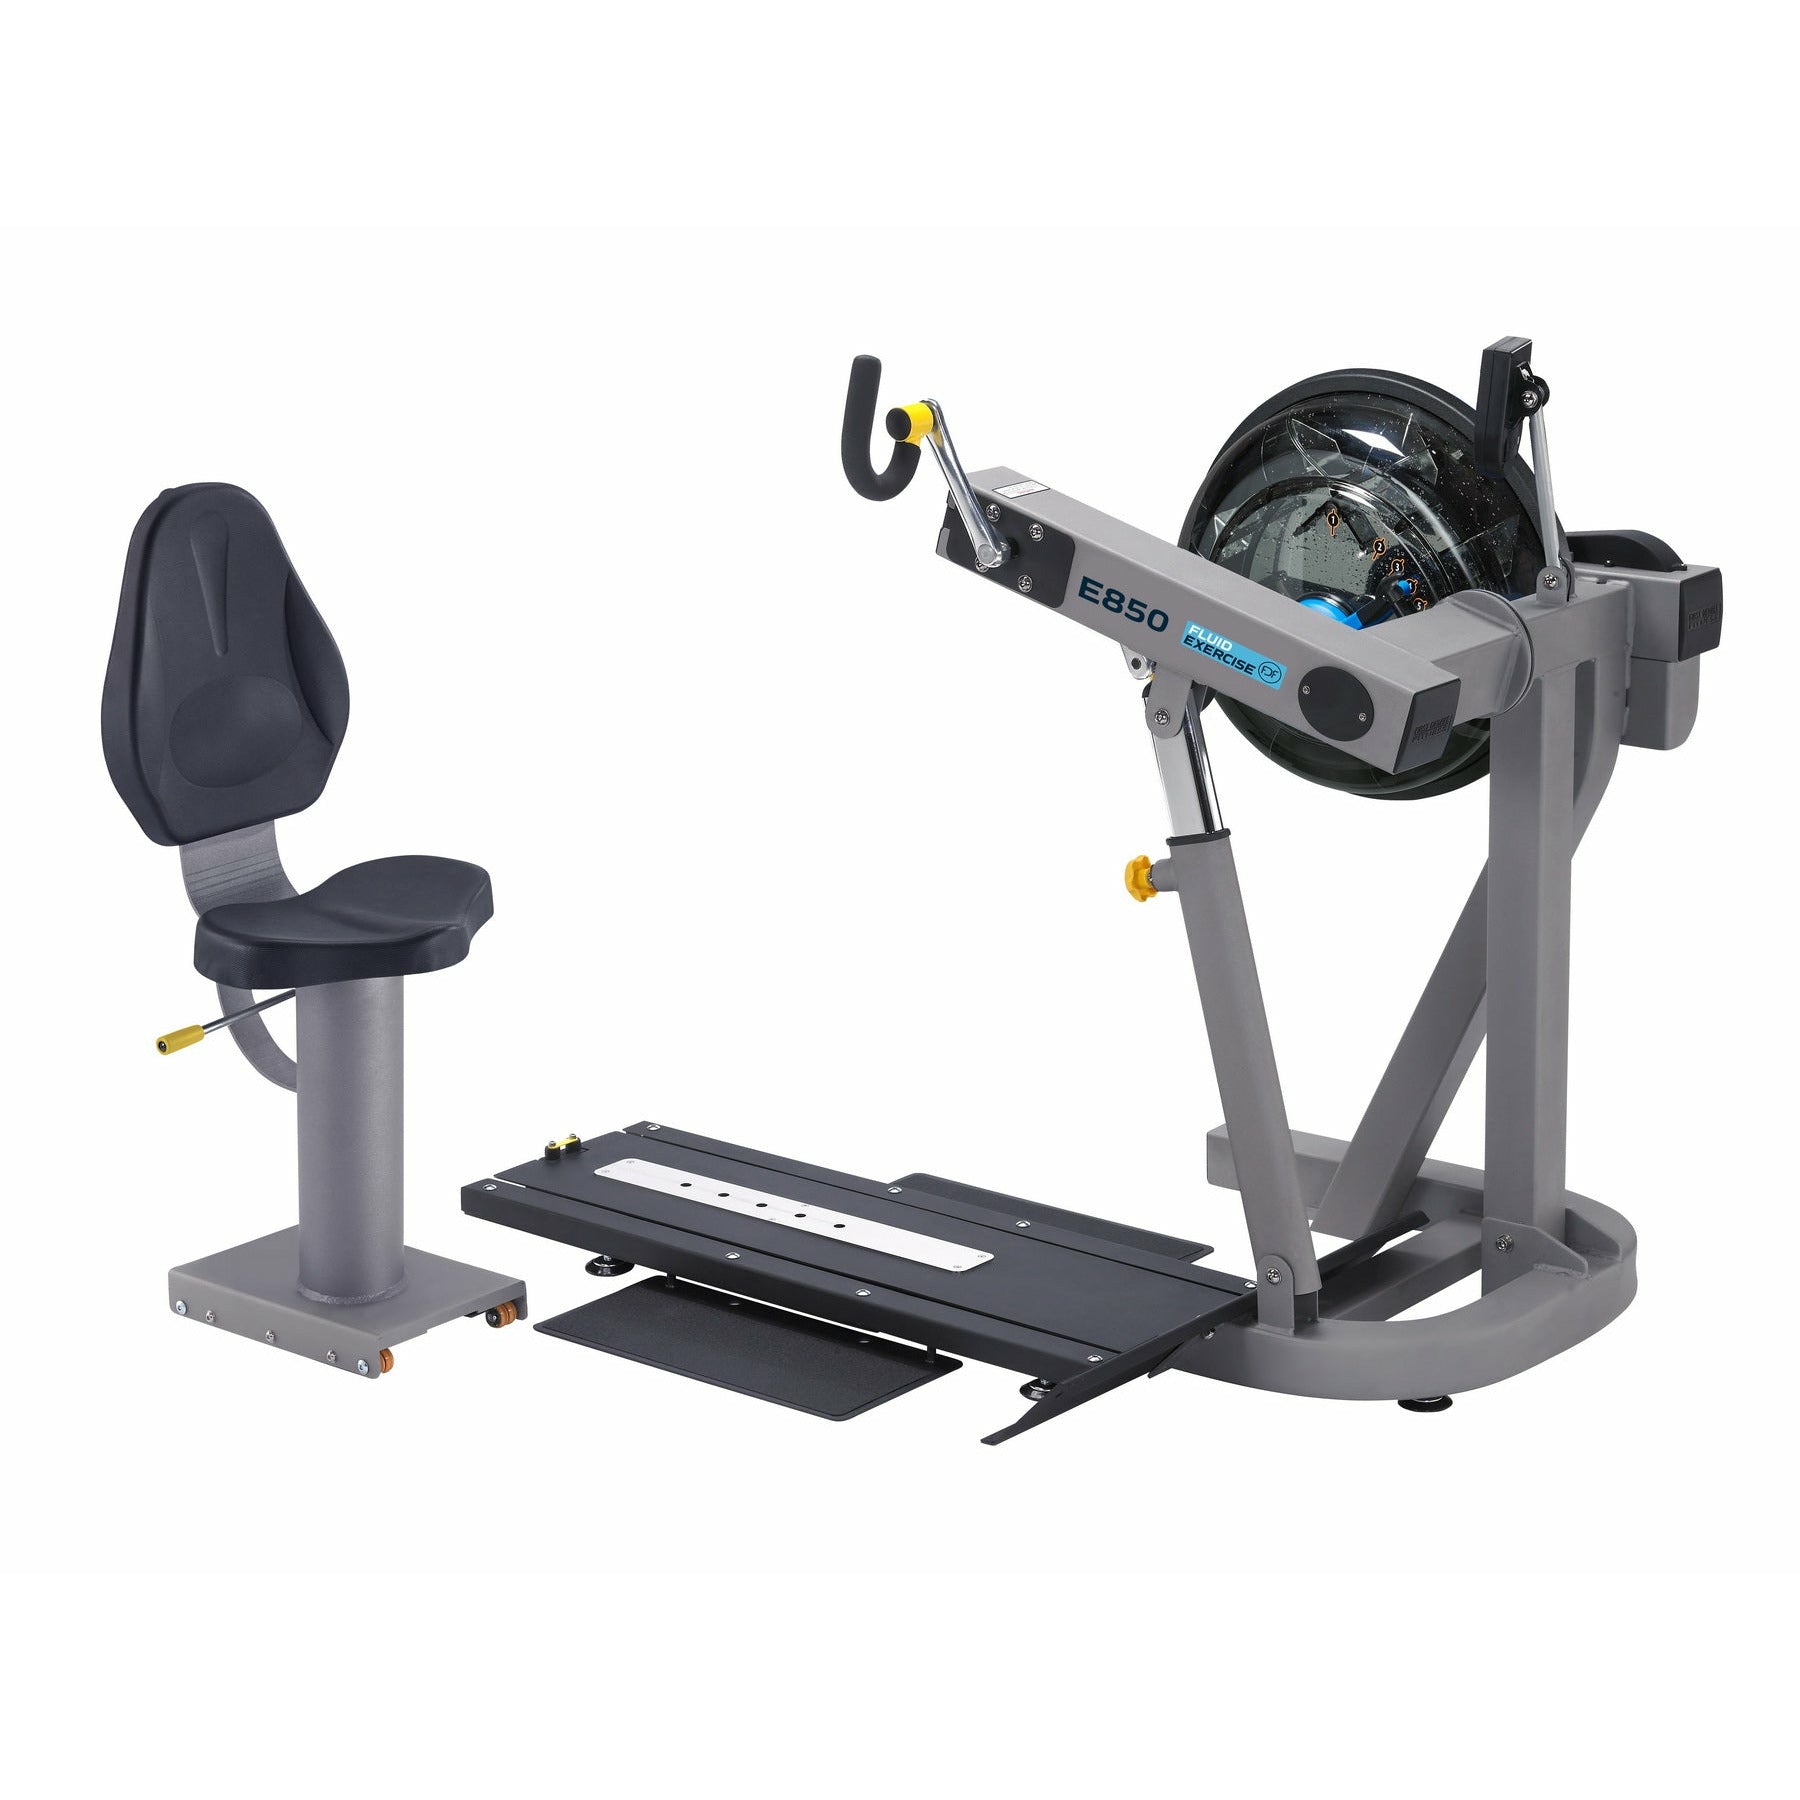 First Degree Fitness E850 UBE